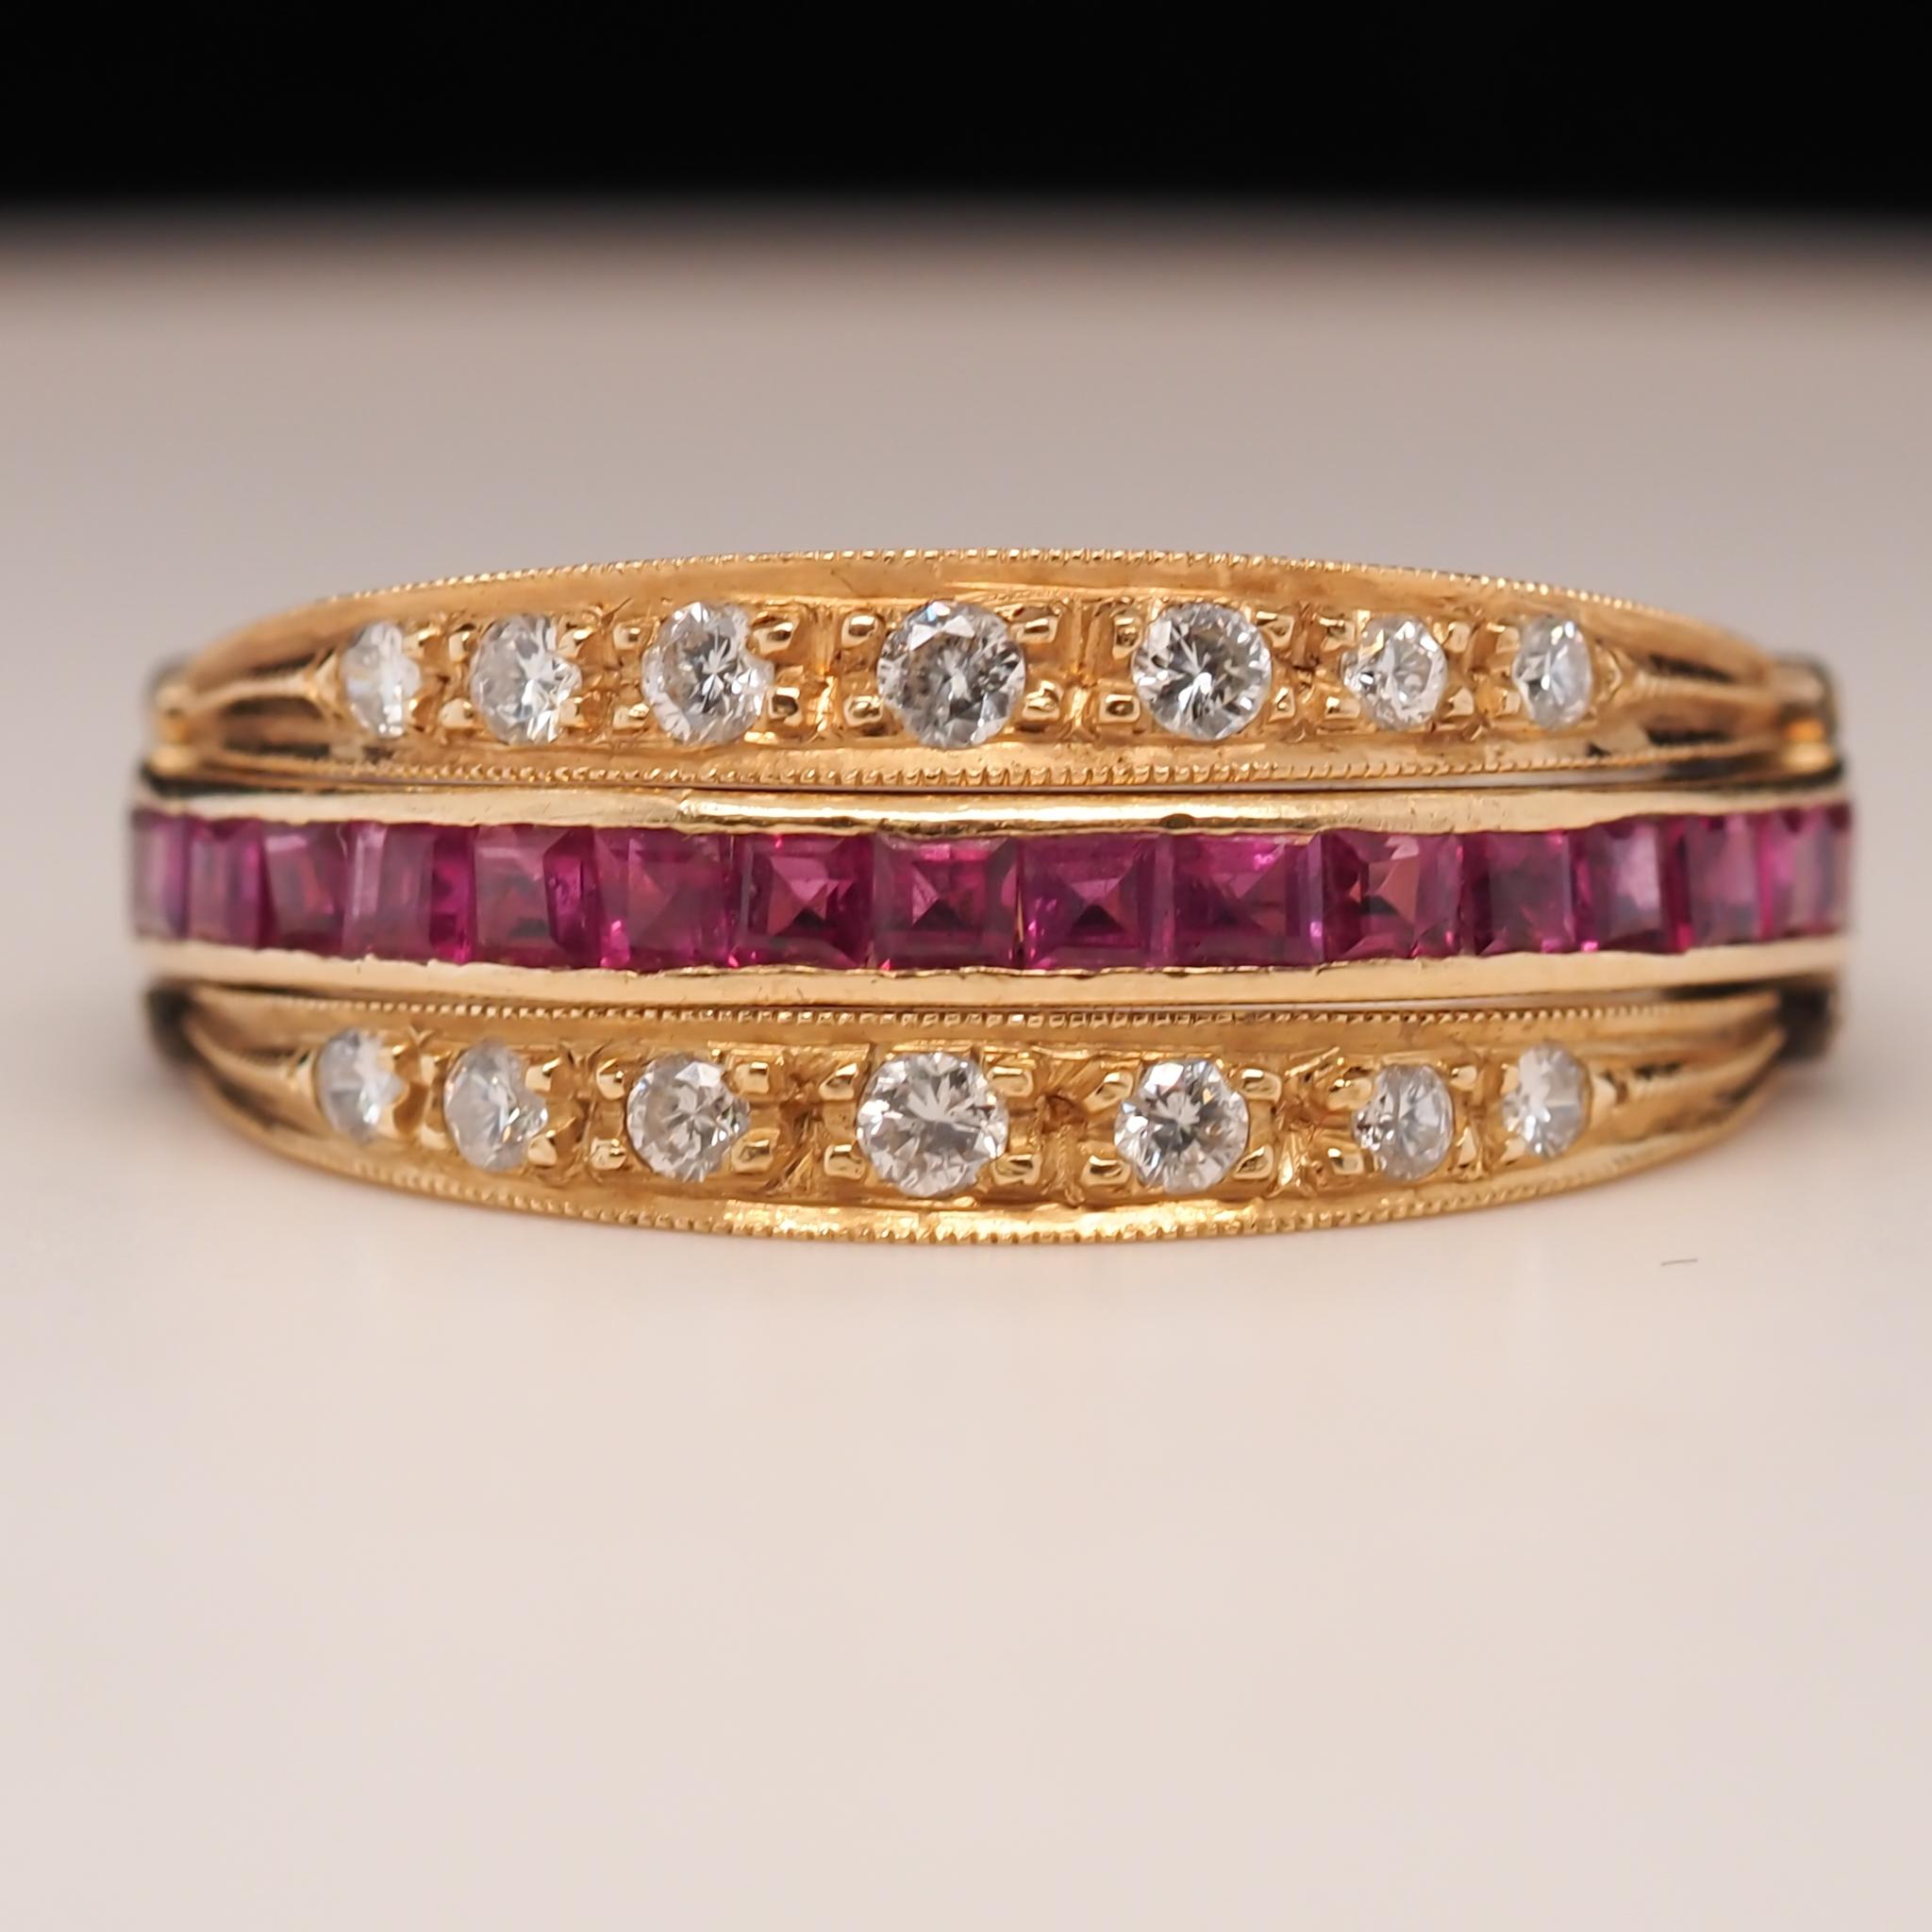 Year: 1960s

Item Details:
Ring Size: 7.25
Metal Type: 18K Yellow Gold [Hallmarked, and Tested]
Weight: 5.9grams

Diamond Details: .35ct total, E-F Color, VS Clarity, Round Brilliant, Natural Diamonds

Ruby Details: Square Step Cut, .75ct total